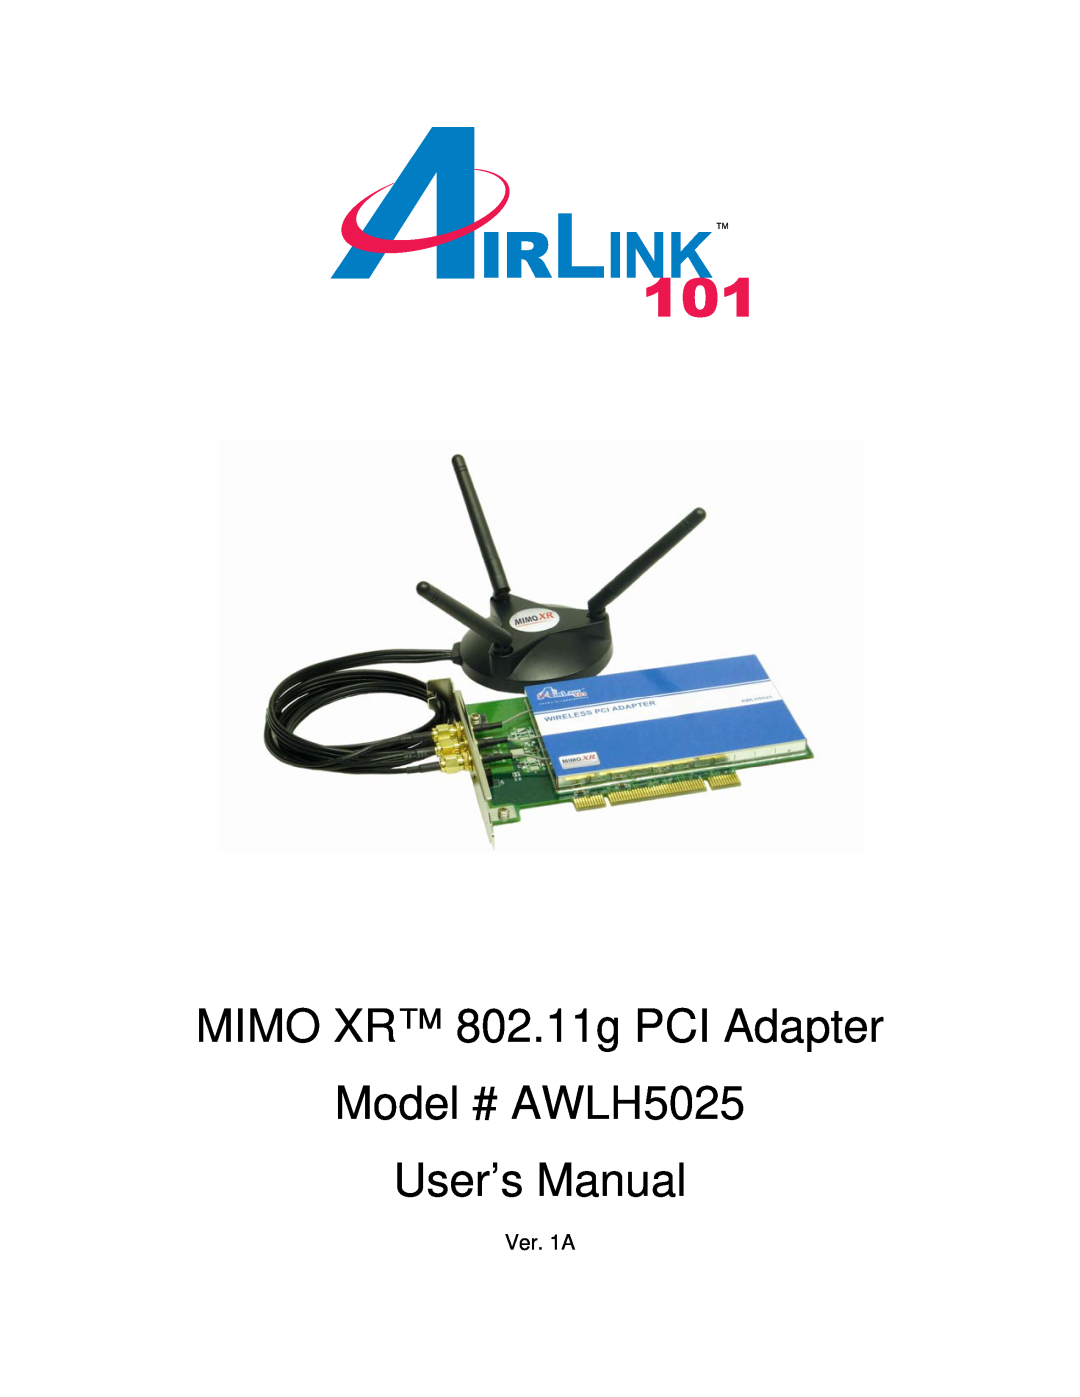 Airlink101 user manual Ver. 1A, MIMO XR 802.11g PCI Adapter, Model # AWLH5025 User’s Manual 